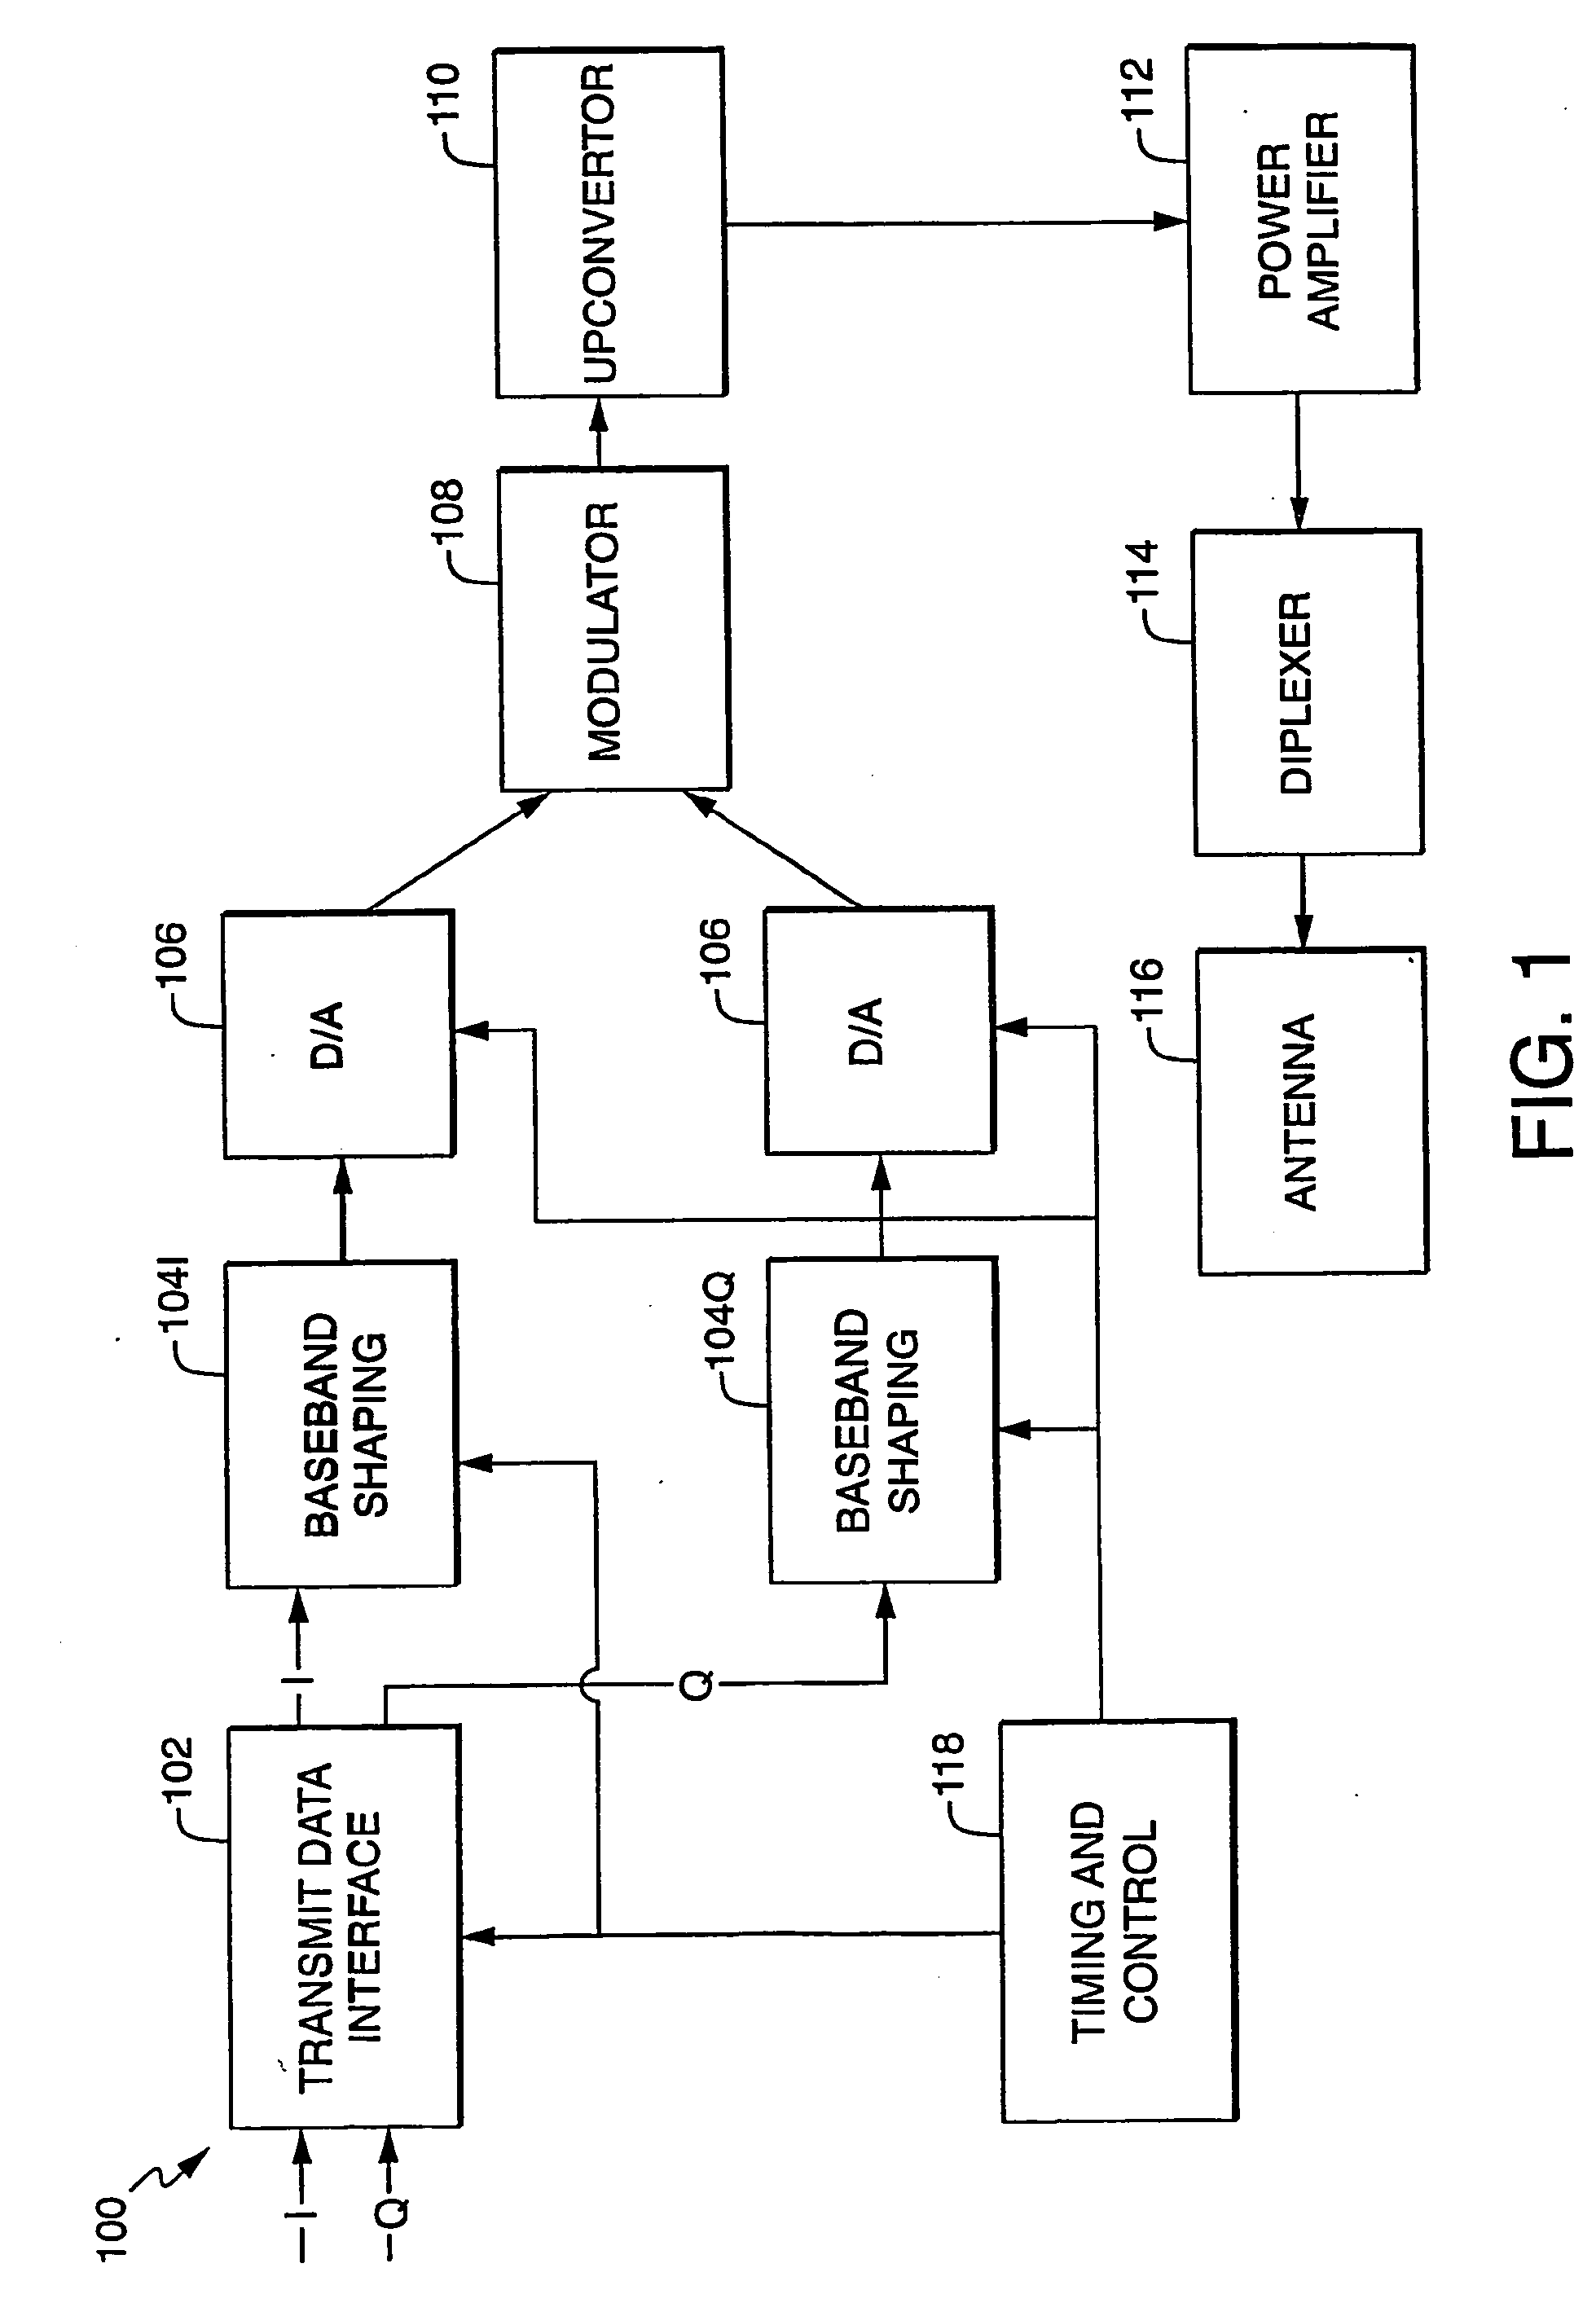 Method and device for pulse shaping qpsk signals